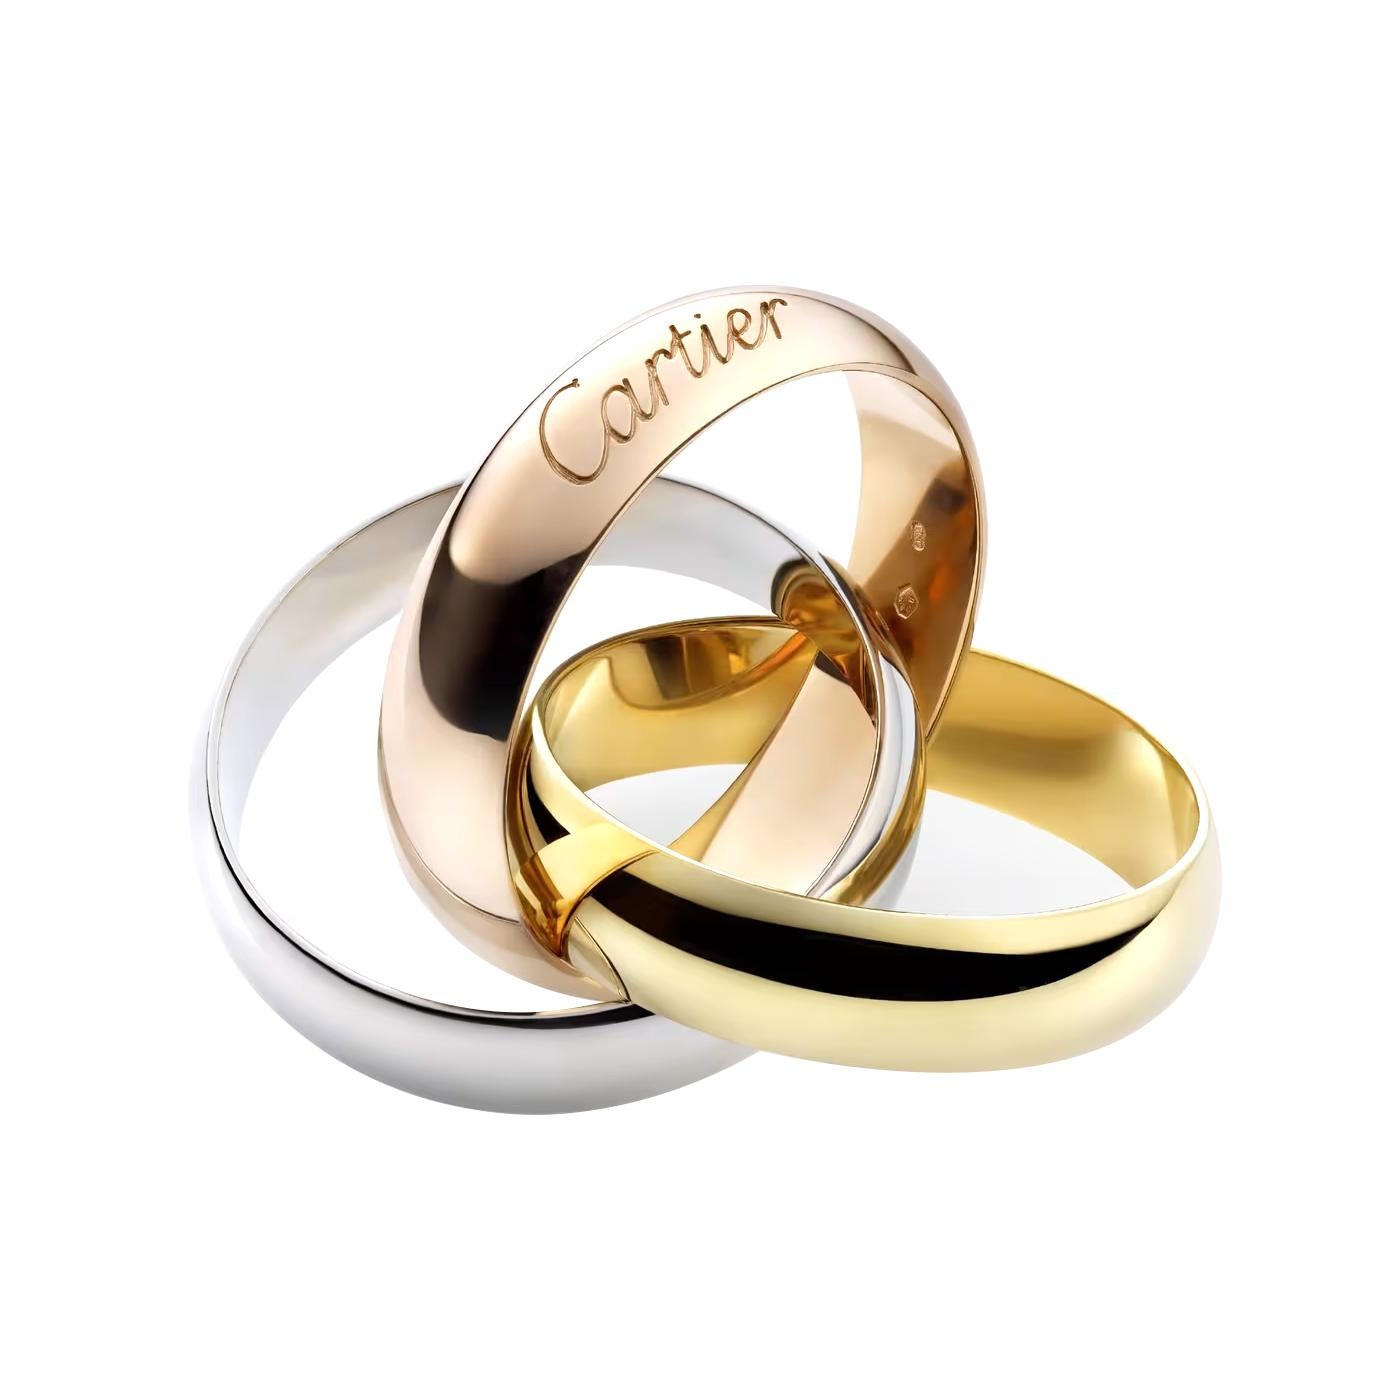 Trinity ring, medium model, 18K white gold (750/1000), 18K rose gold (750/1000), 18K yellow gold (750/1000). Width: 3.53 mm (for size 53).

Details:
Brand: Cartier
Type: Trinity ring
Metal Purity: 18k White Gold / 18K Rose Gold / 18K Yellow